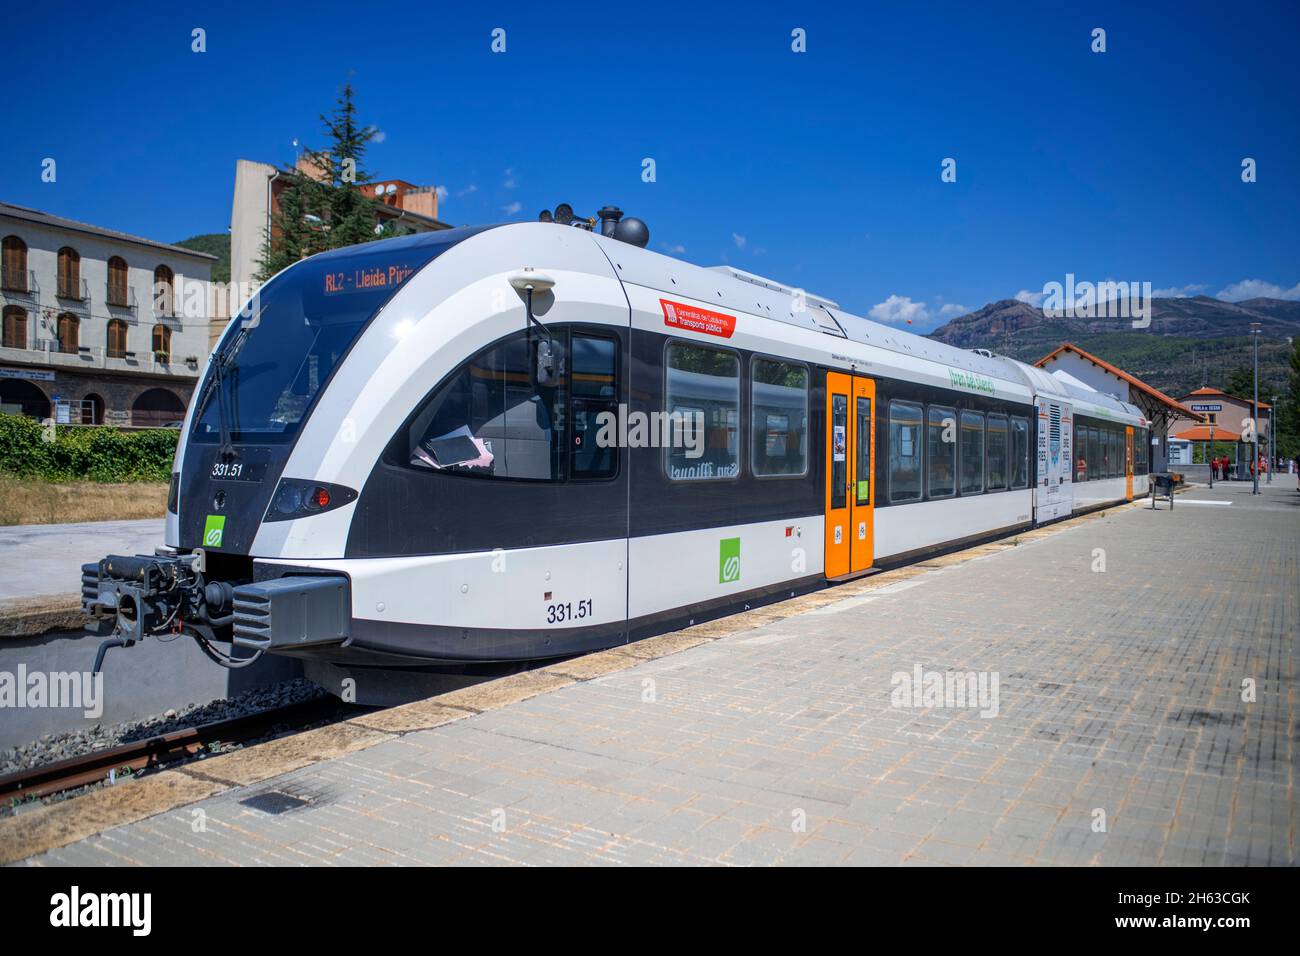 New Tren dels llacs. Lagoon train from Lleida to Pobla de Segur in Pallars Jussà, Pyrenees, Catalonia (Spain, Europe).  Historical train with diesel l Stock Photo